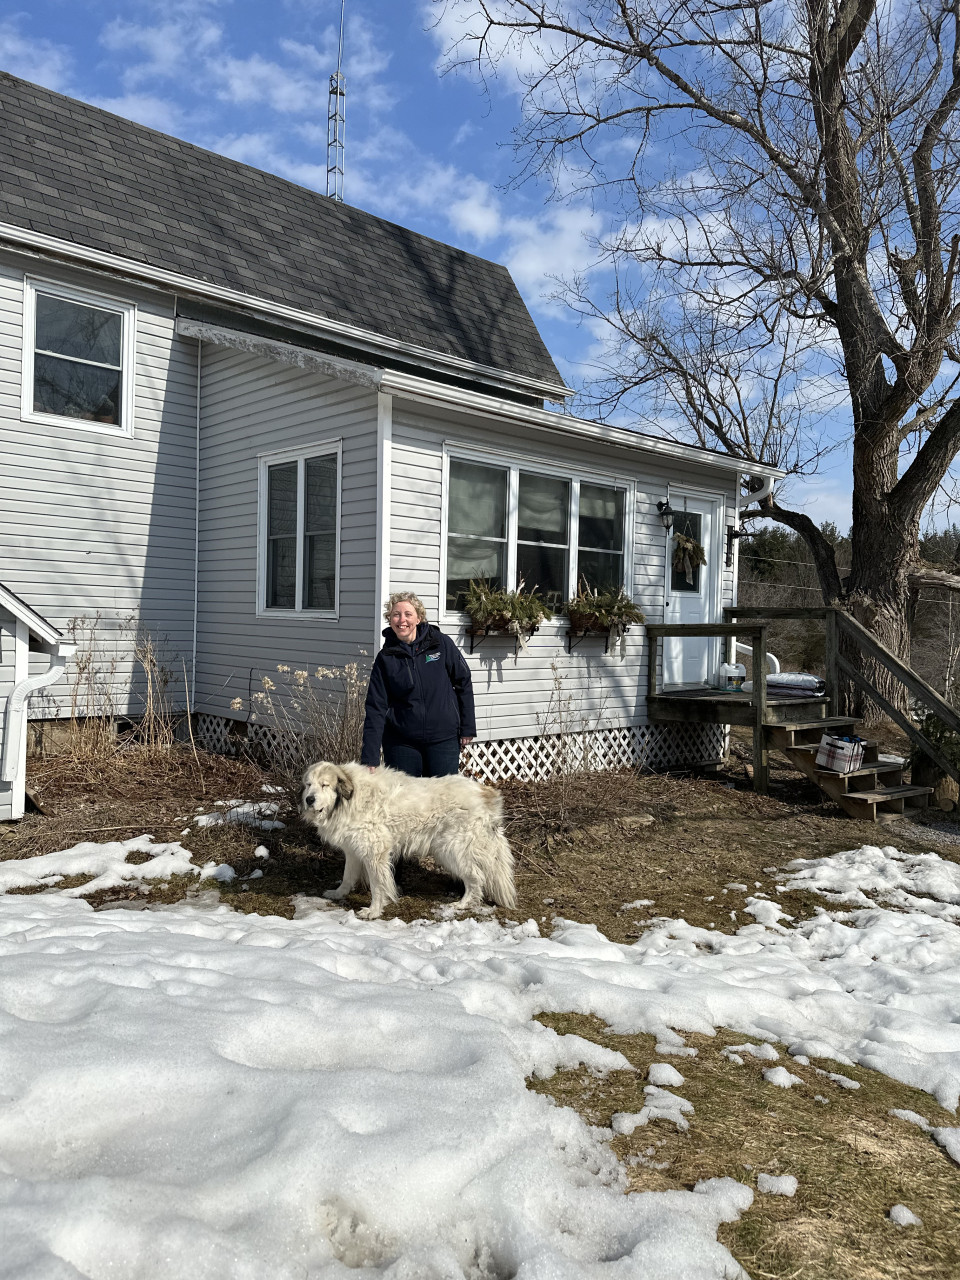 A woman and a large white dog in front of a white farmhouse